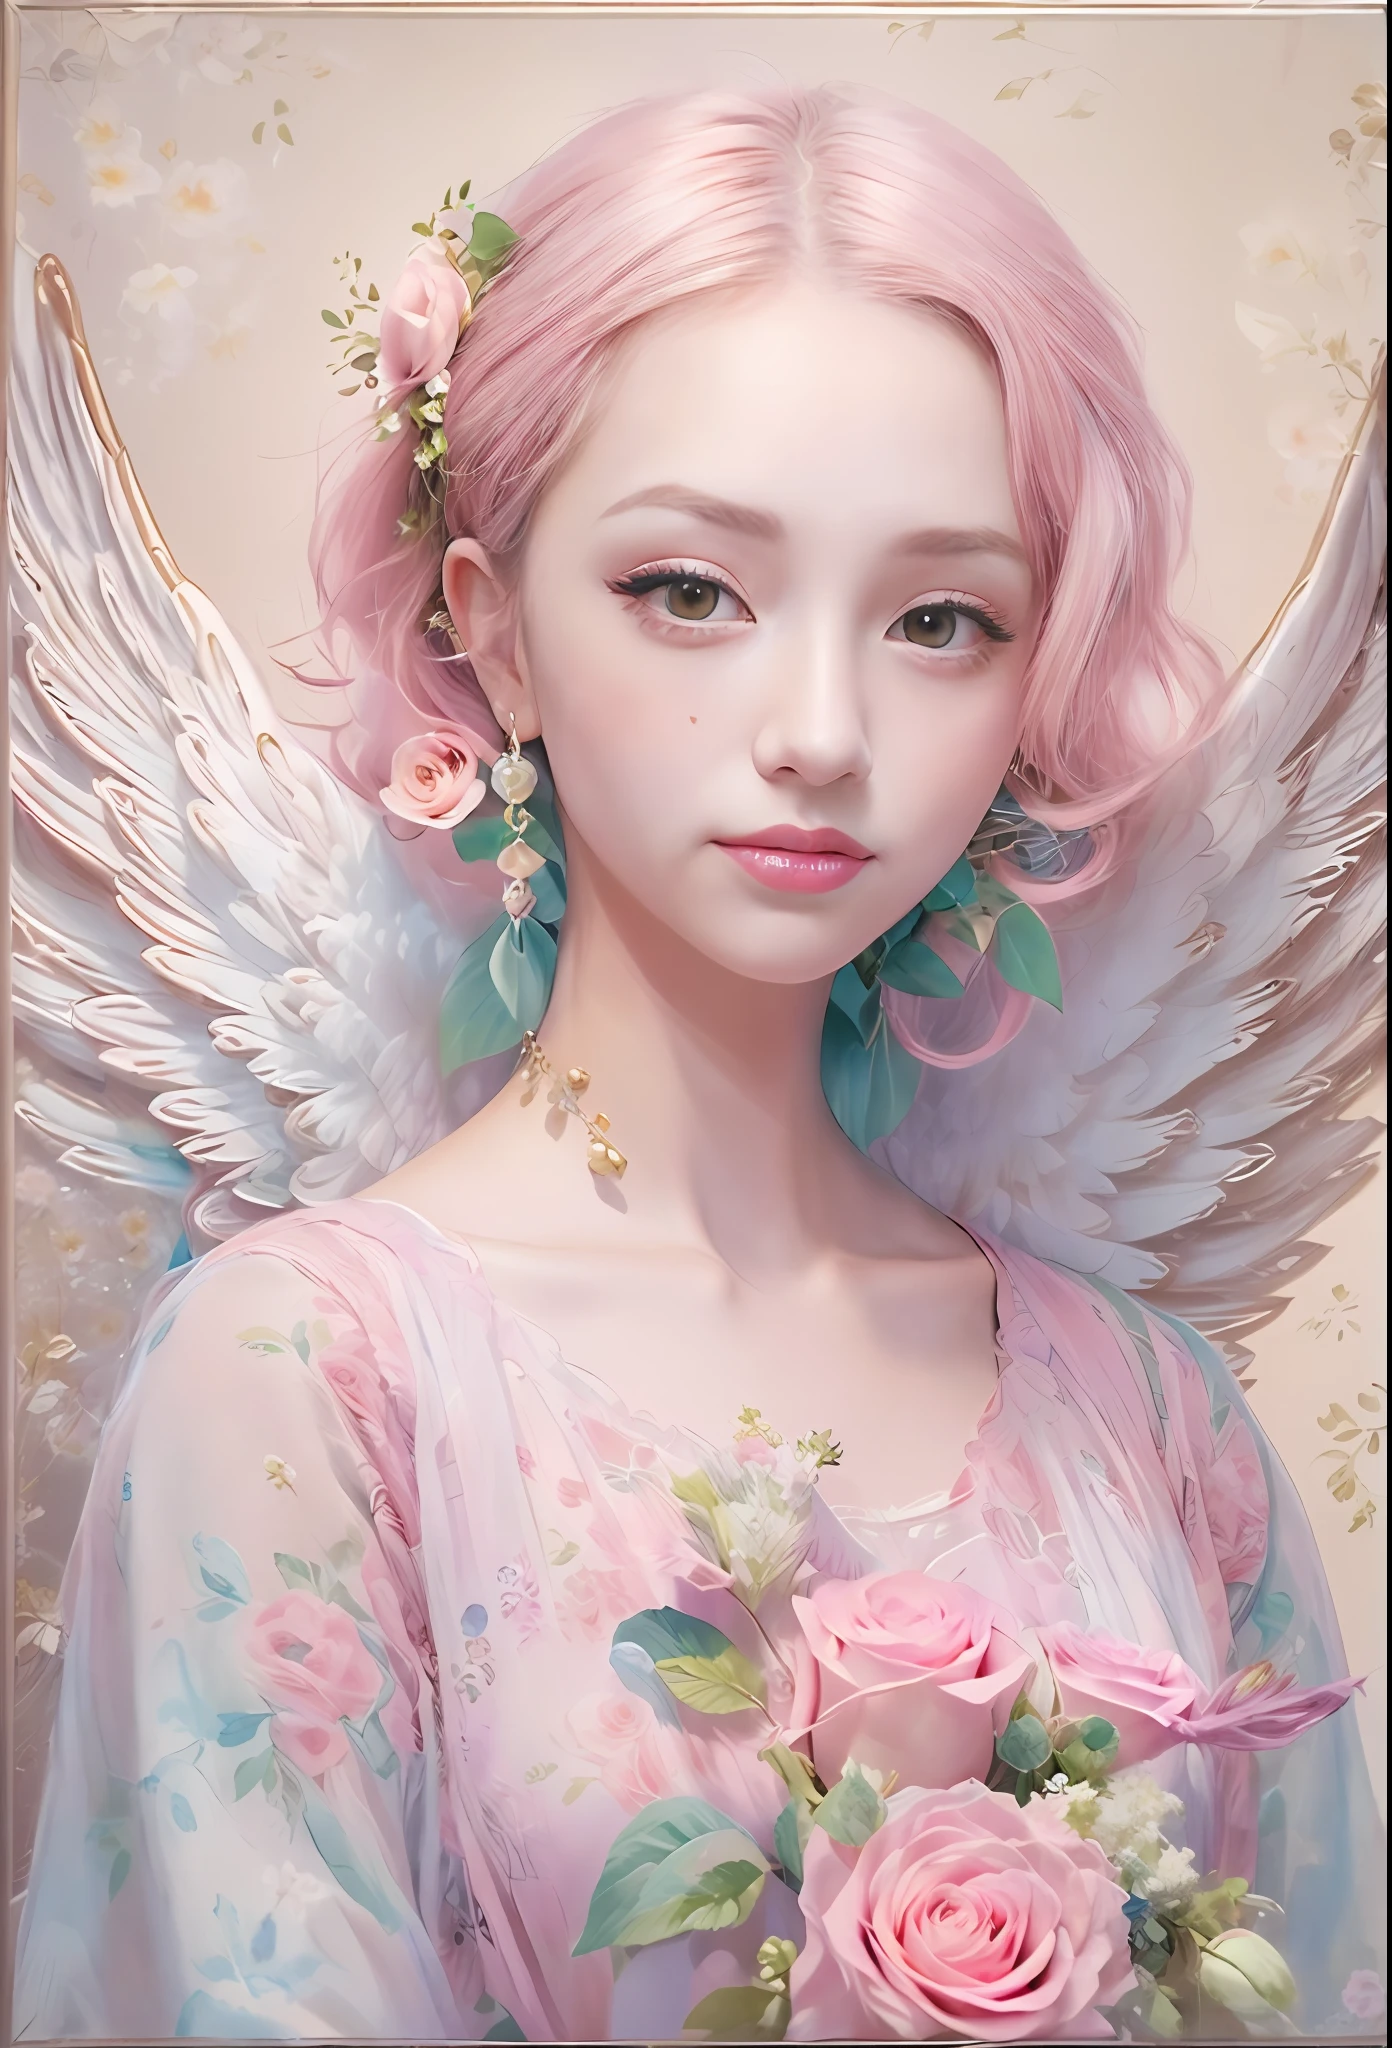 kawaii、Pale pink color illustration、(Angel wings、😇、a smile、😌🥰Archaic Smile).hyper realstic、Ultra-realistic、Depiction of the human body without distortion、Monna Lisa、Woman in the Arms、Near and far law、Three-dimensional、Contemporary painting、moderno、world masterpiece、collection、Homage to the art or artist work of Picasso and Renoir, Not sentimental、Excellent portrayal、Gentle expression、More detailed character faces, Serious competition、Compositions like paintings、(Konmutsuki_Gacha_Series 1, punk_rosette), Realistic、Delicate brushwork、aqua color flowers, (Full body, elegant flowers background)